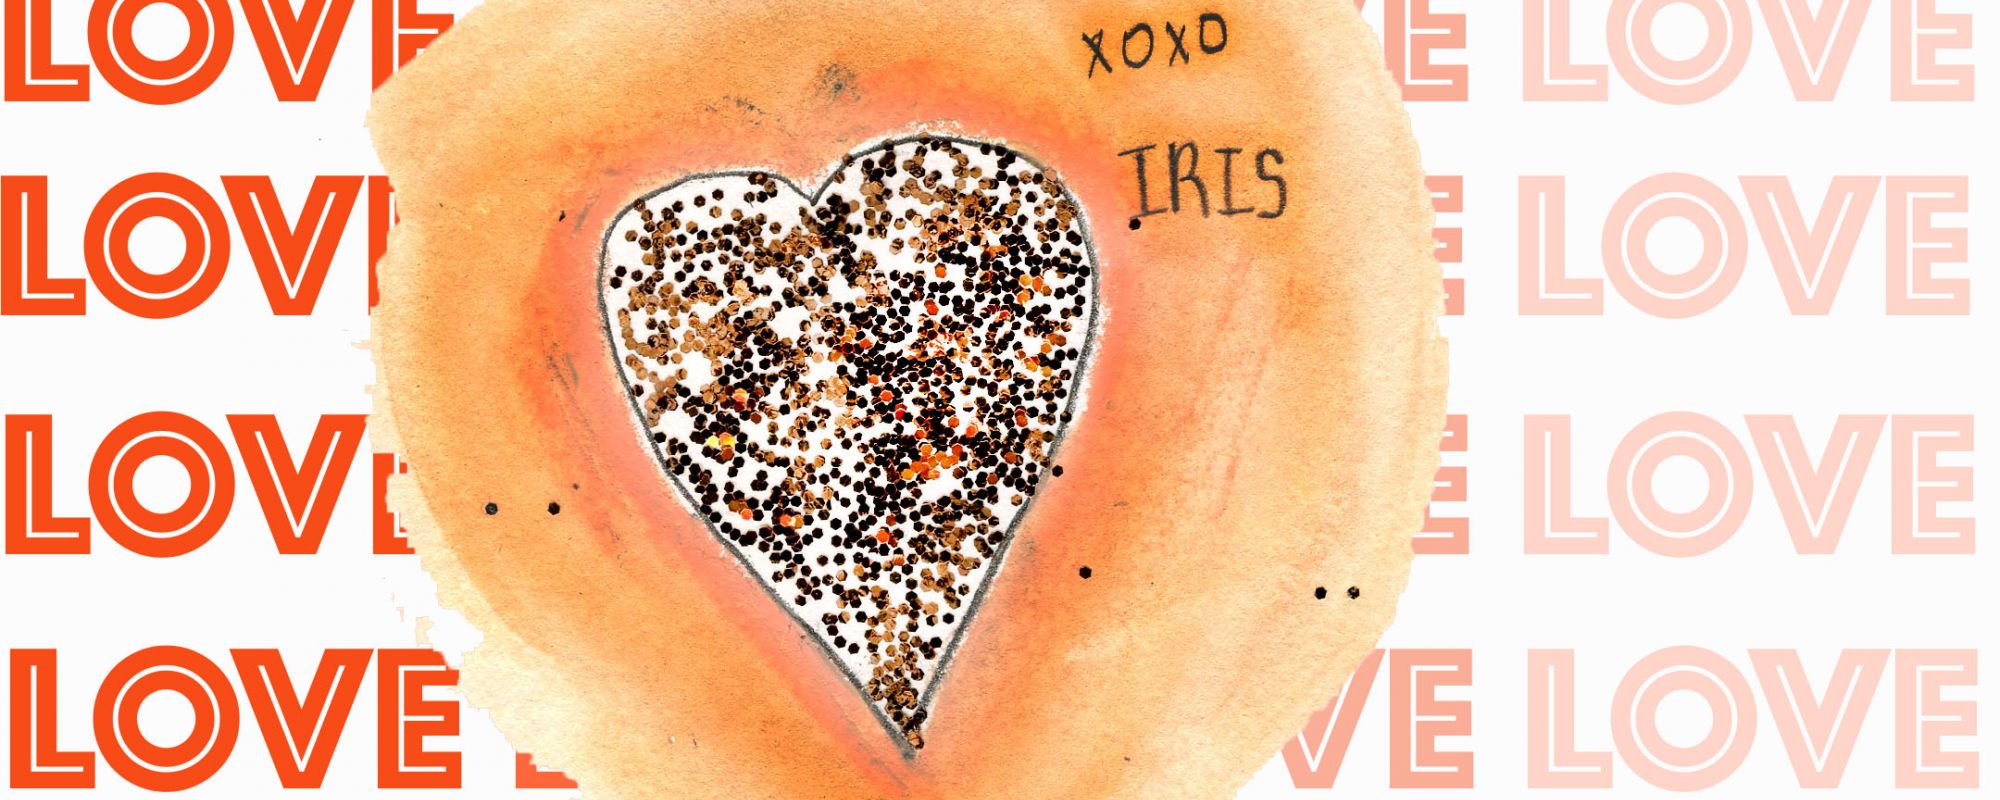 A sparkling heart surrounded by the word "Love"